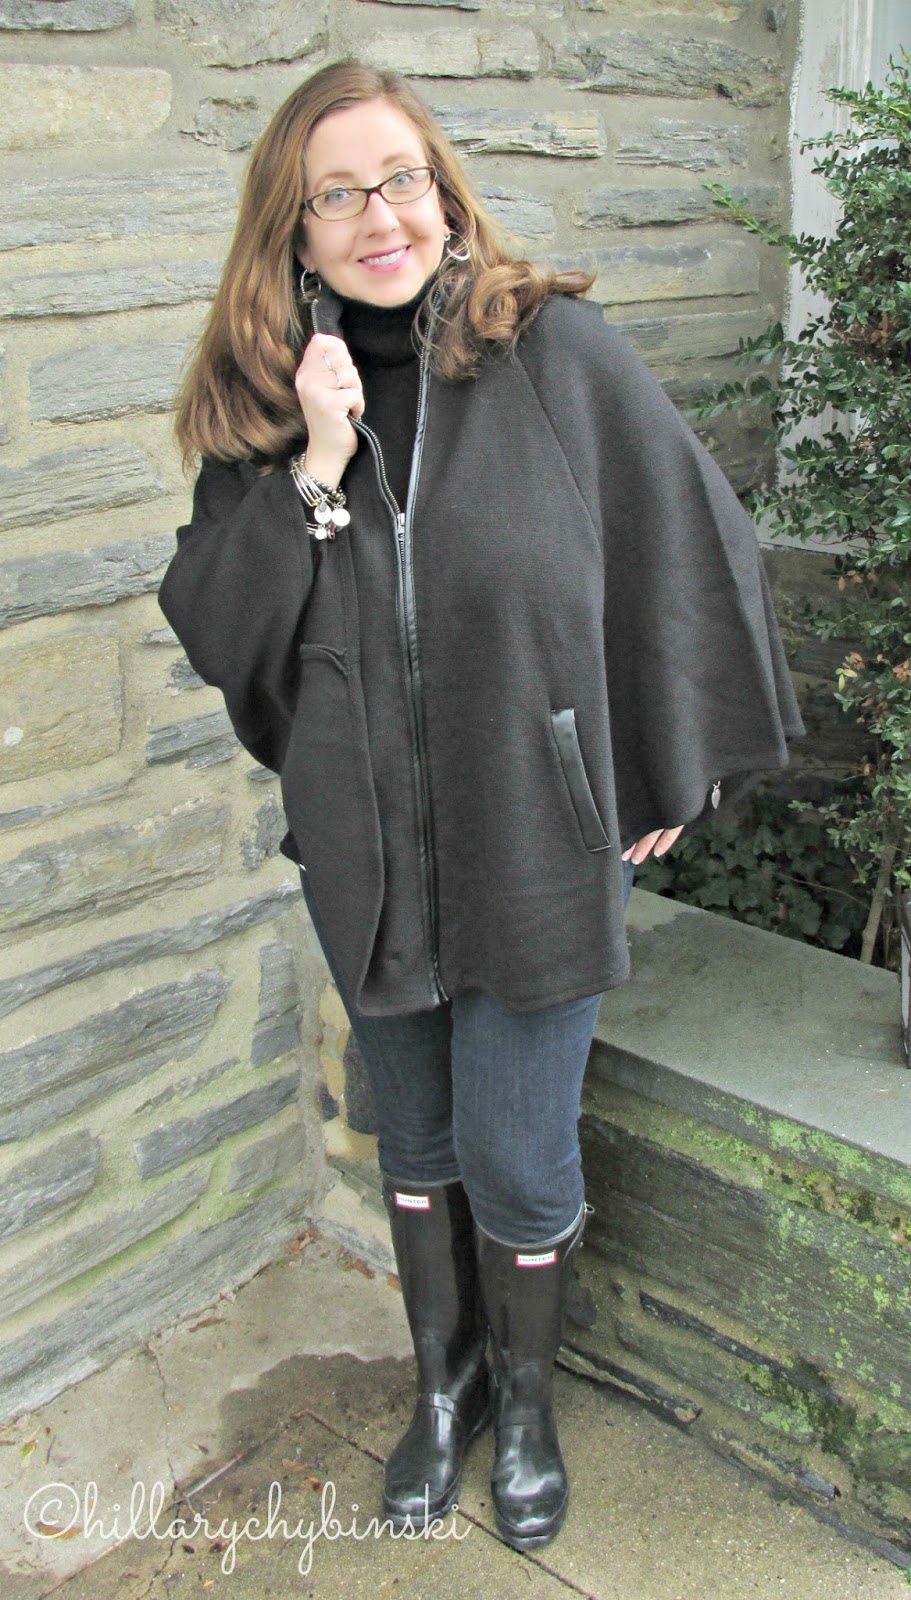 Don't Love Coats - Try a Cape